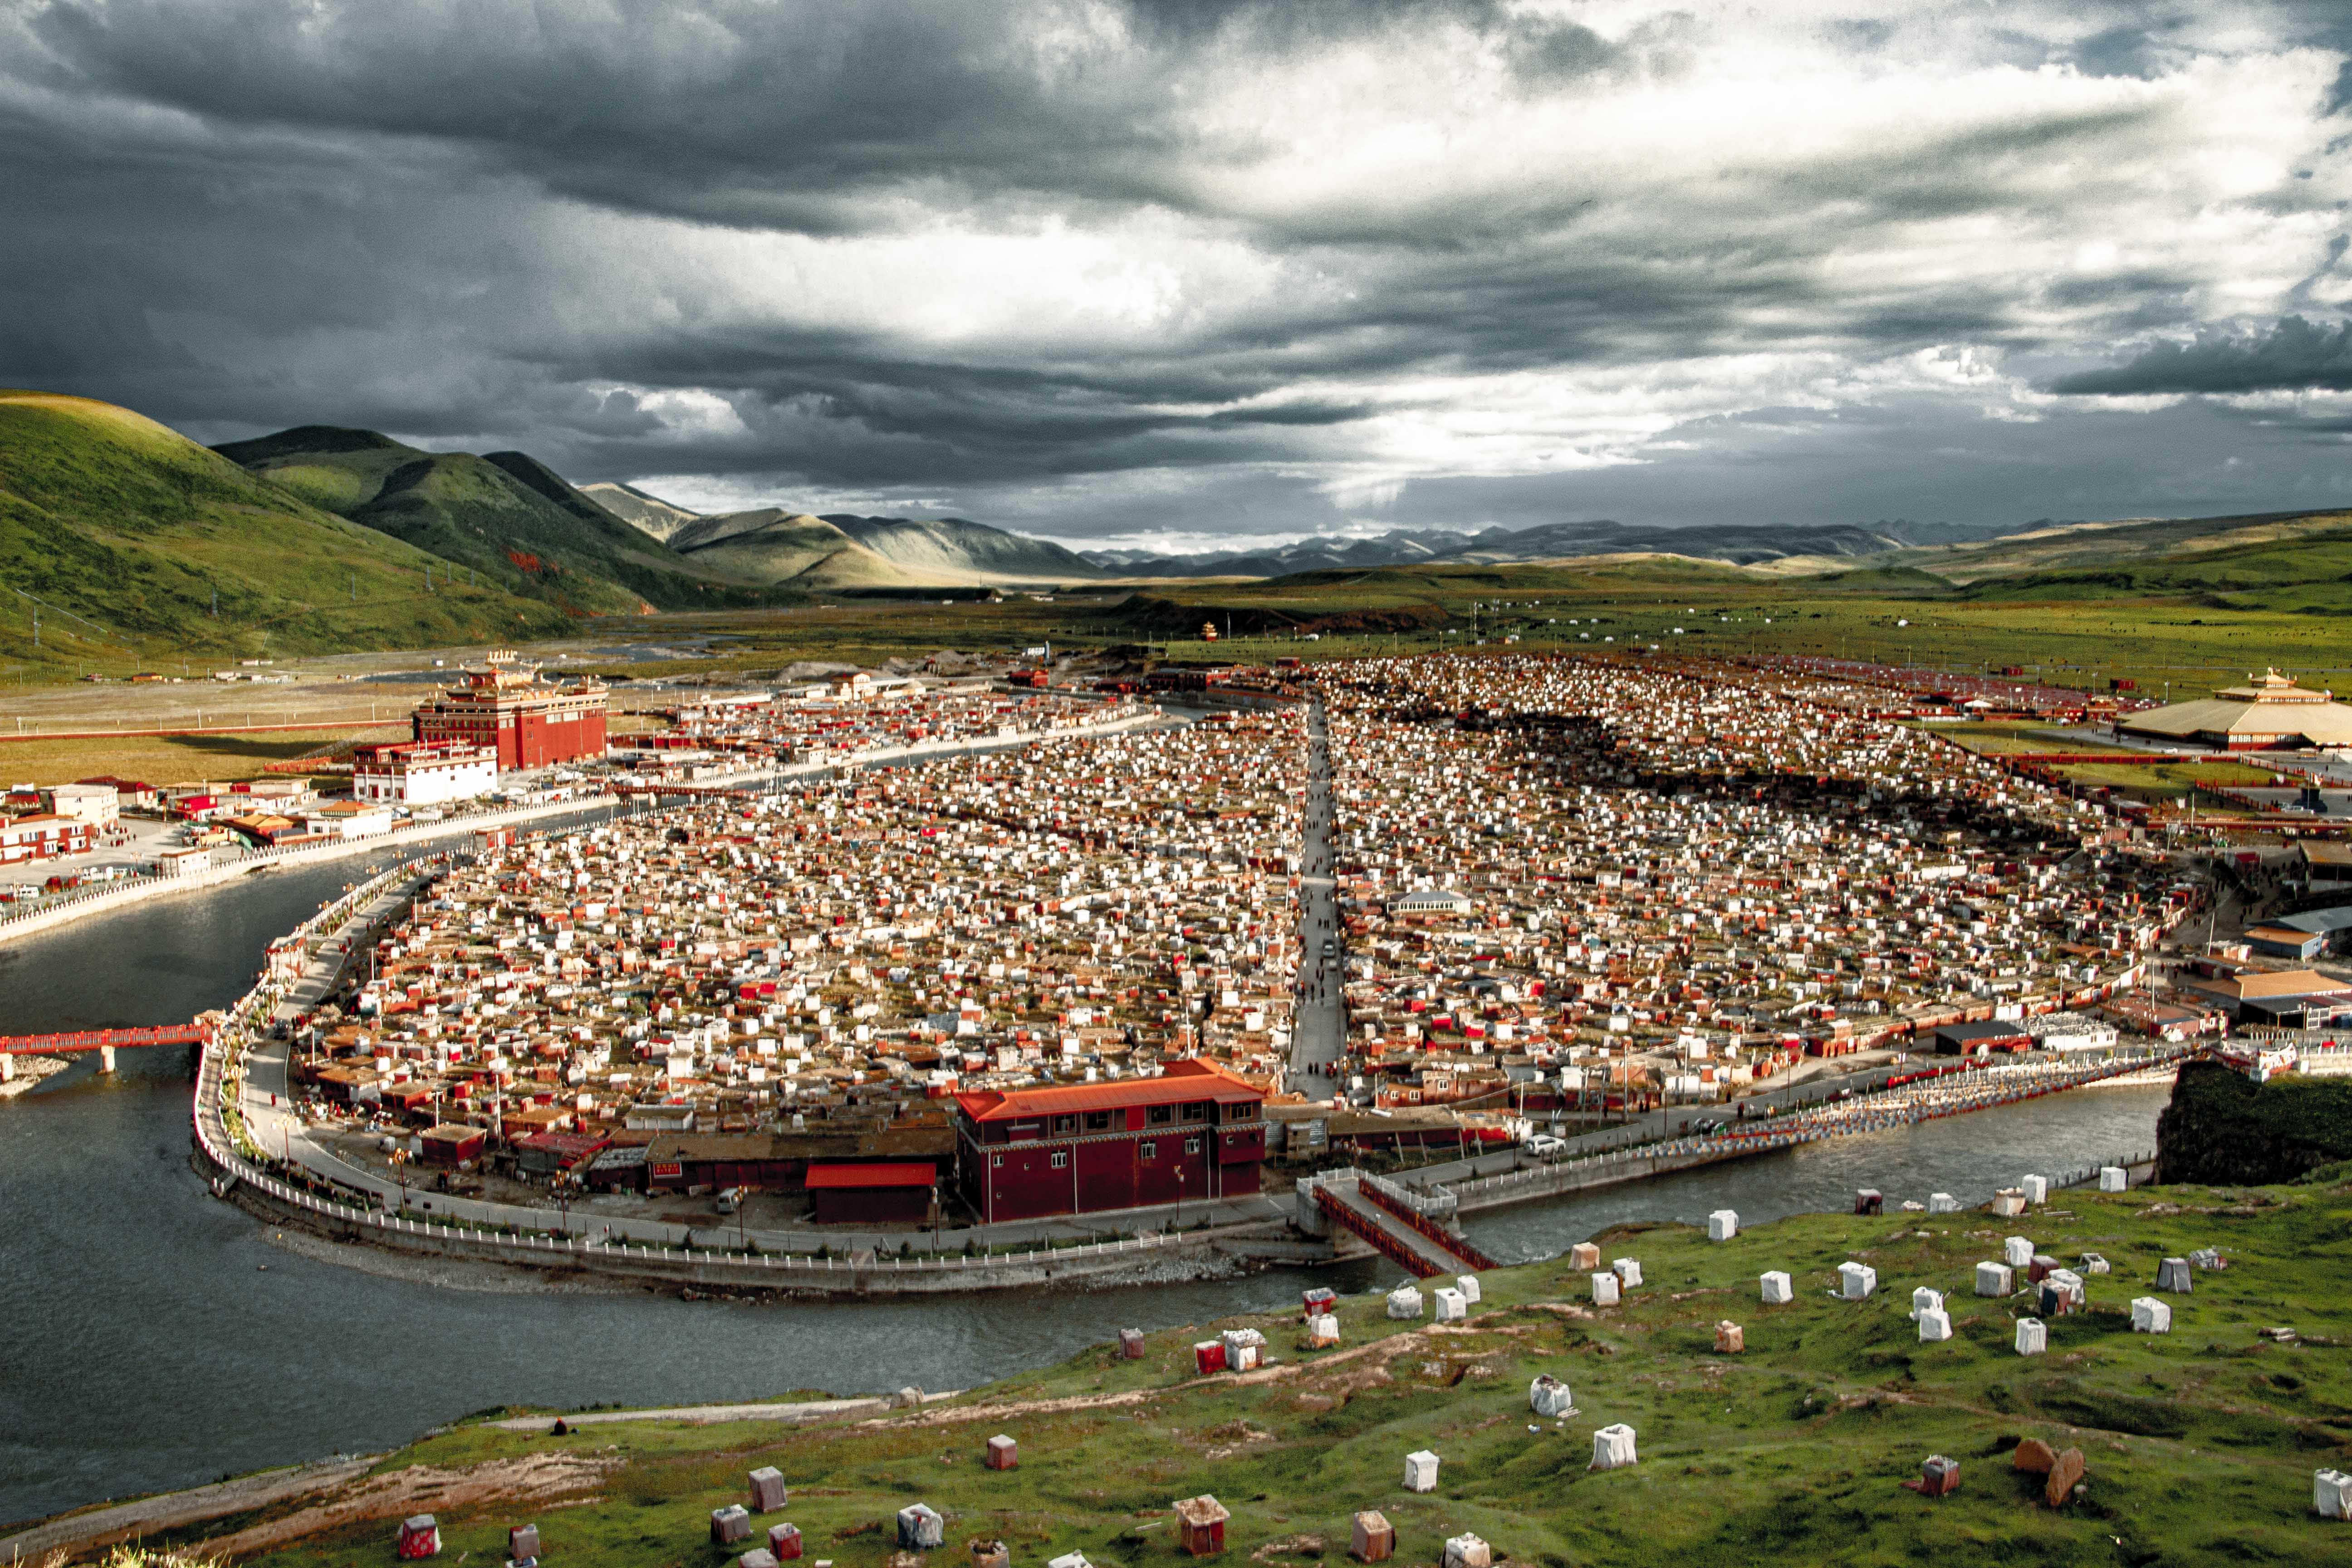 From the holy hill, Yarchen Gar rises in the heart of the lost kingdom of Tibet, treasure of peace and beauty in the Sichuan highlands. The oldest tradition of Tibetan Buddhism, Nyingma, is taught to more than ten thousands followers, the largest concentration of monks and nuns in the world.